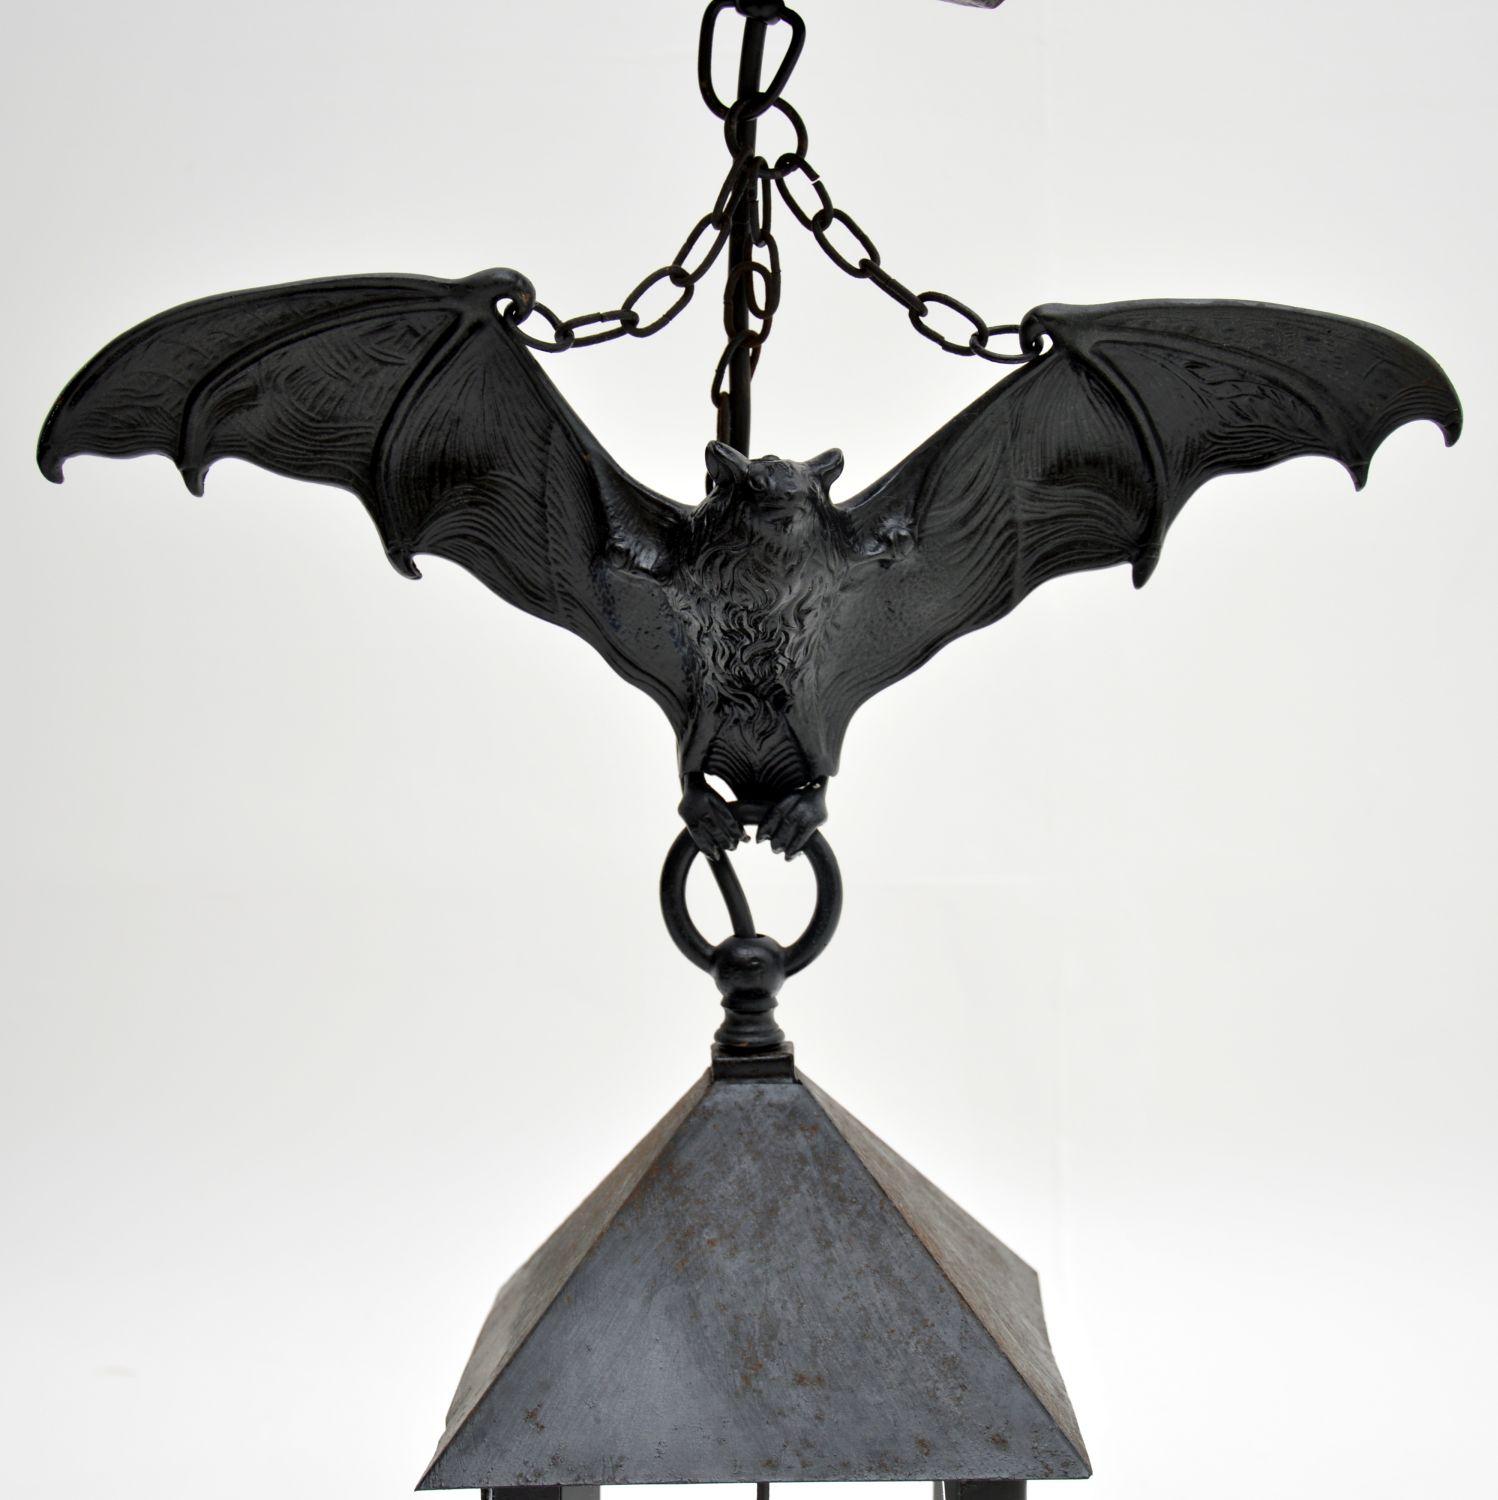 Very unusual antique French cast iron lantern with a very lifelike cast iron bat attached to the top. This lantern has glass panels and has just been re-wired. It’s in very good condition and I would date it to circa 1910 period, although it’s hard